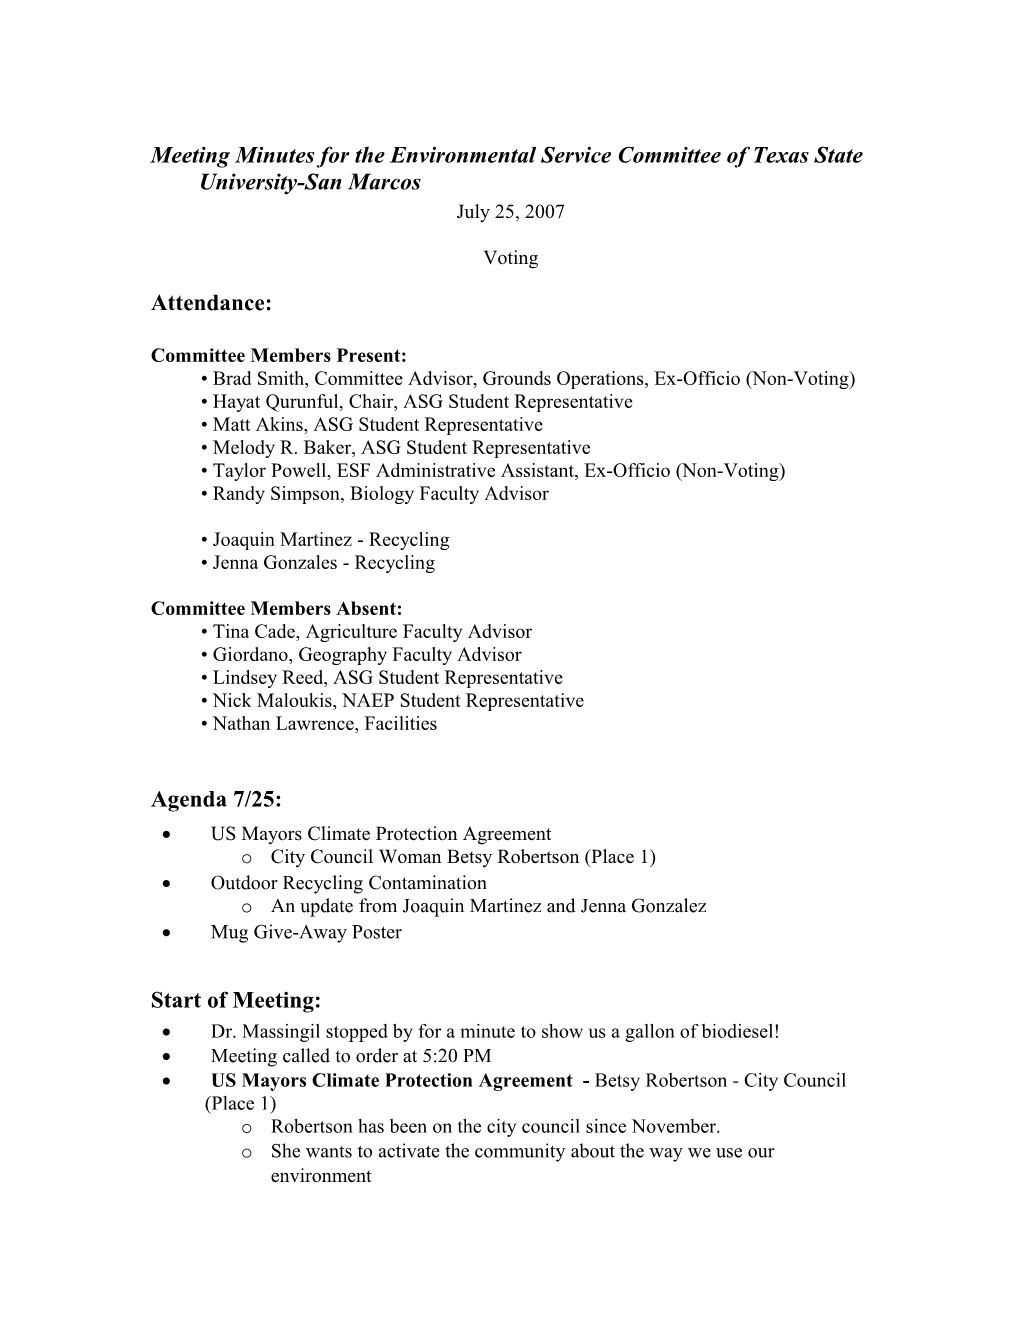 Meeting Minutes for the Environmental Service Fee Committee of Texas State University-San Marcos